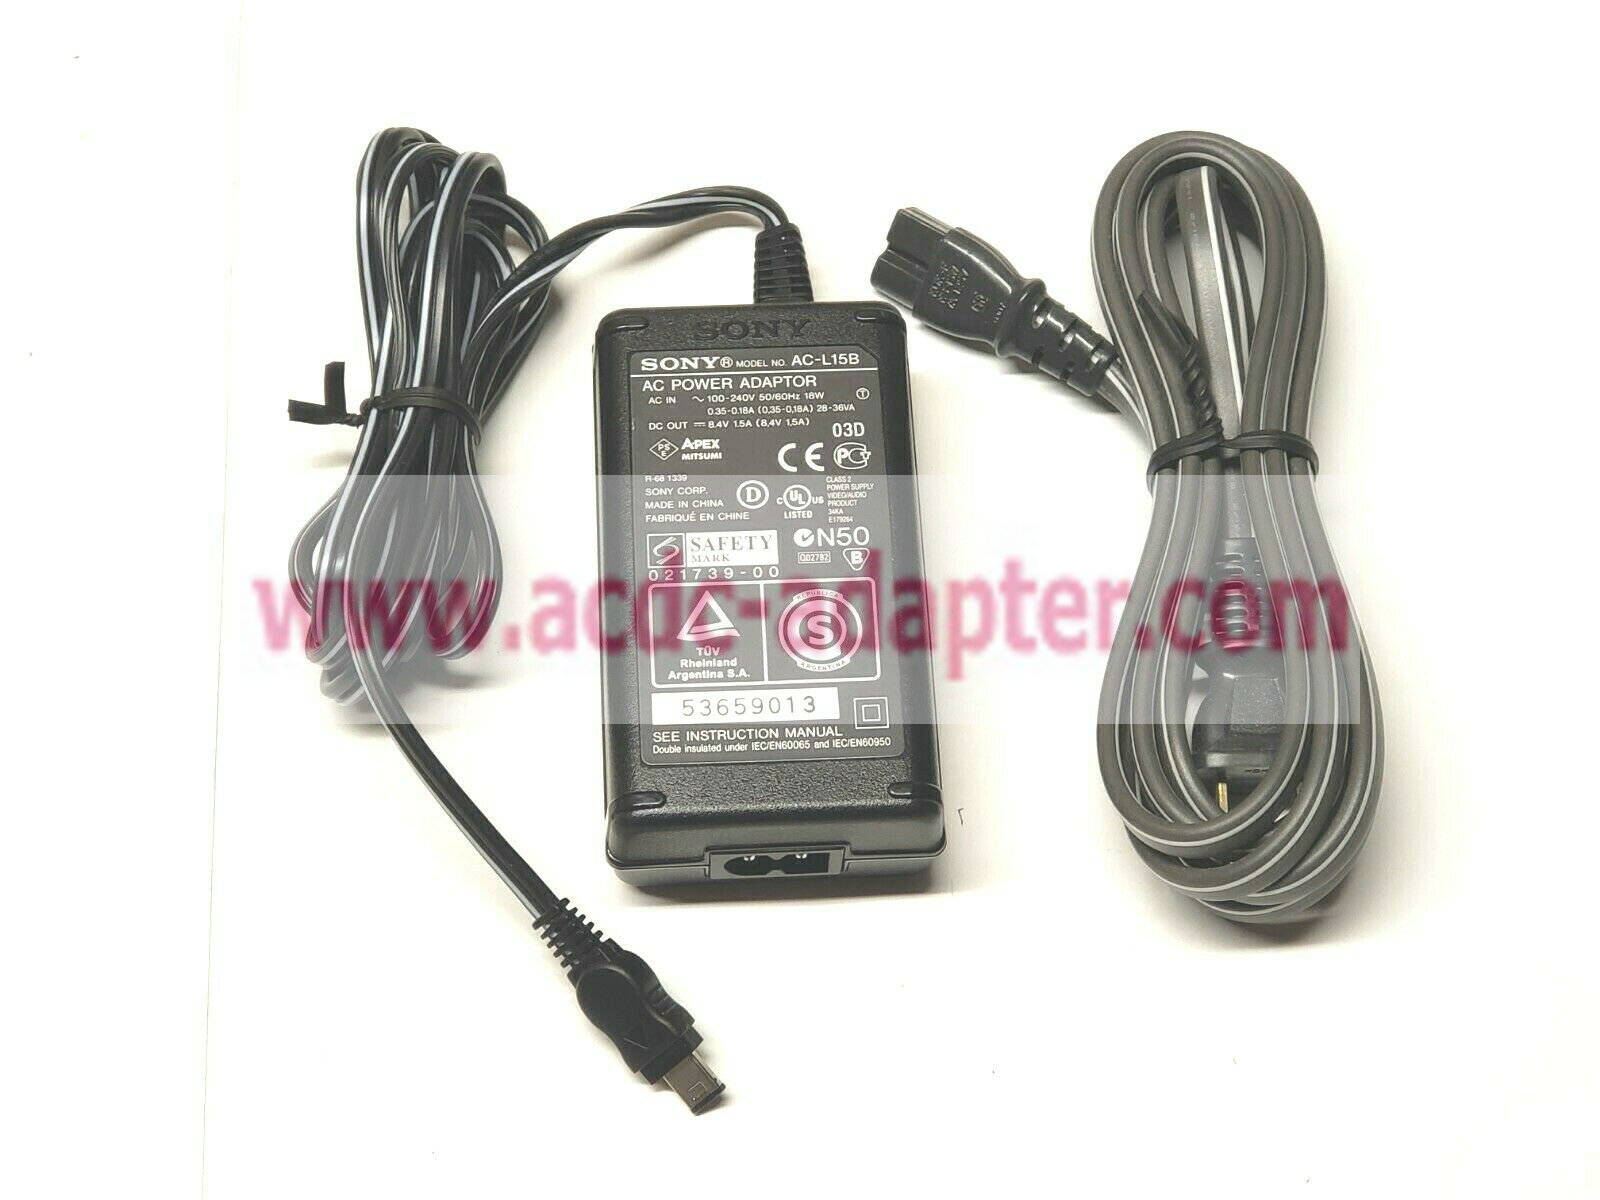 NEW Sony AC-L15B 8.4V 1.5A AC adapter for Handycam CCD-TRV128 Camcorder power supp - Click Image to Close